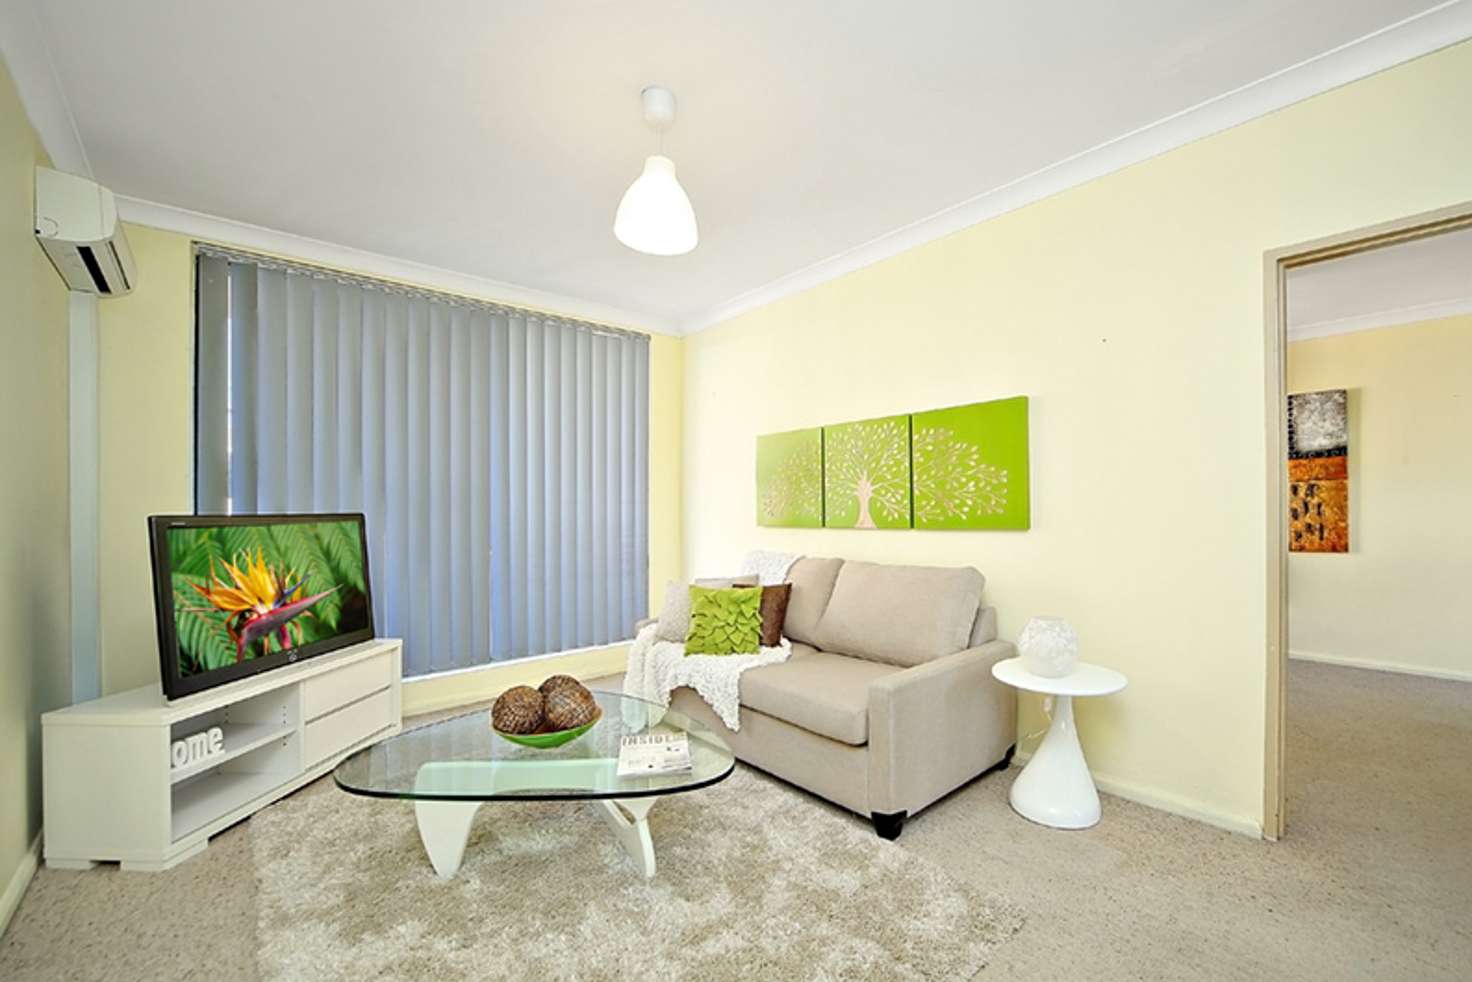 Main view of Homely apartment listing, 22/62 Grosvenor Crescent, Summer Hill NSW 2130